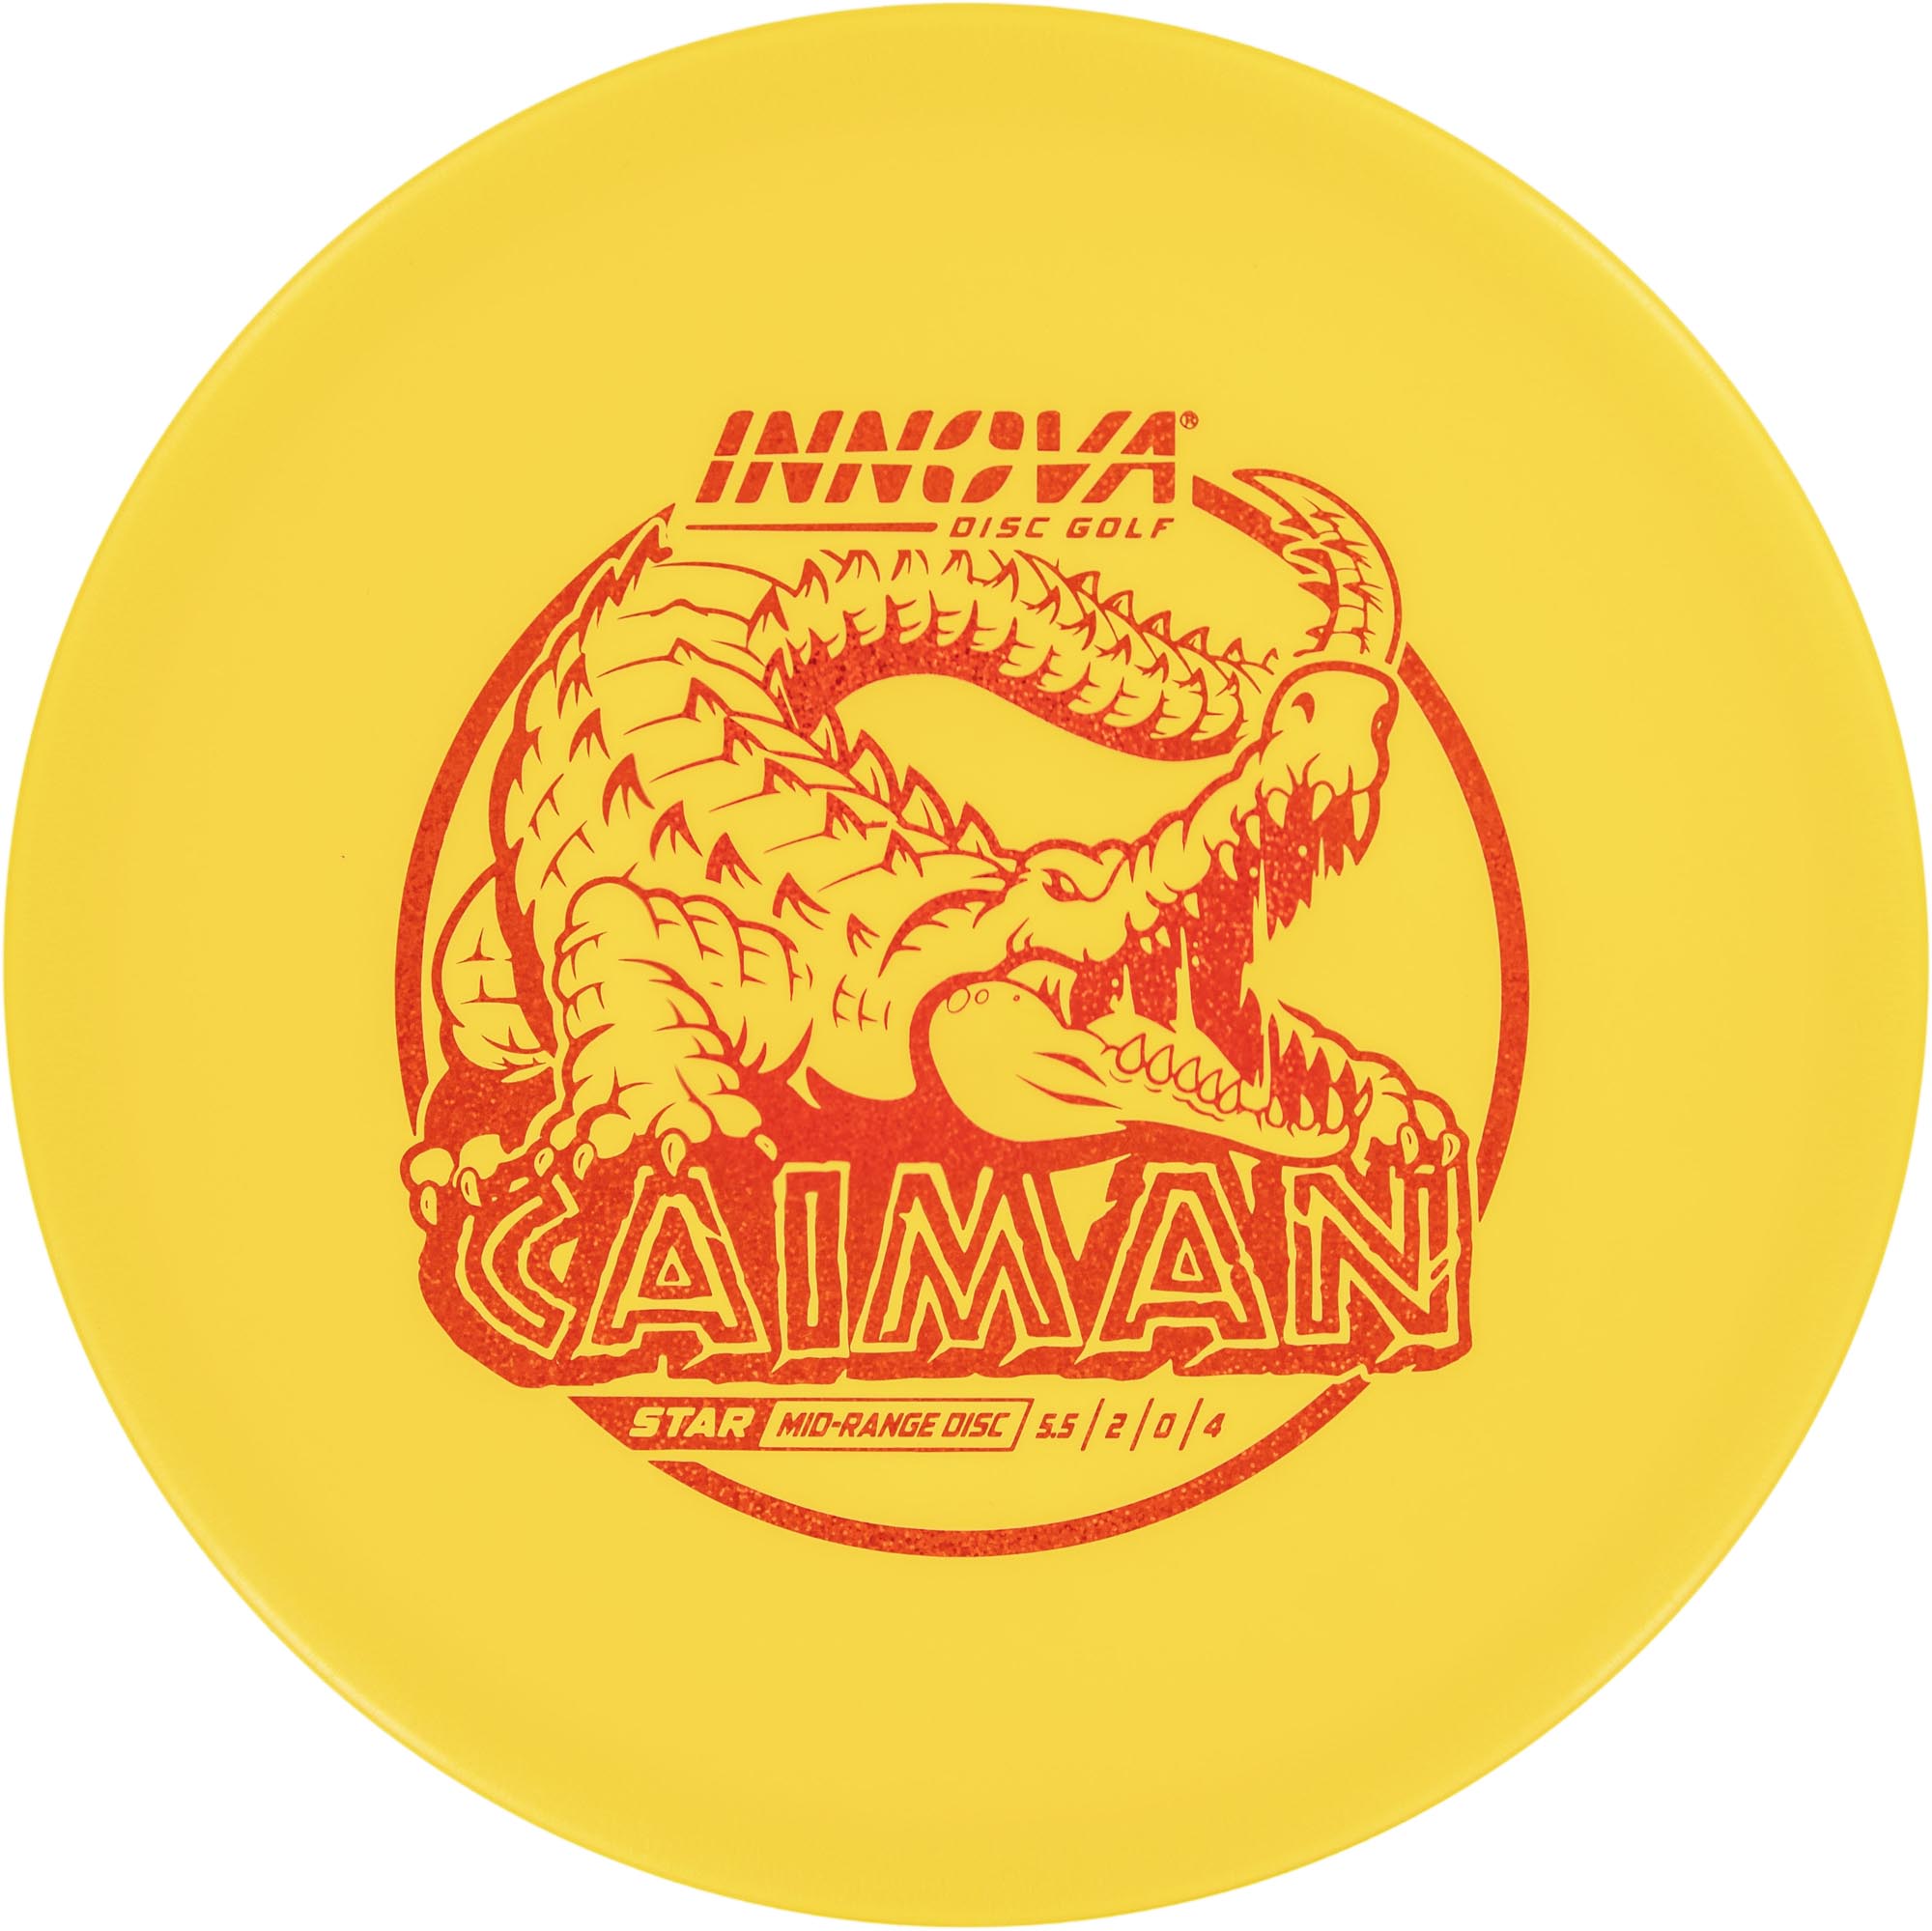 Star Caiman from Disc Golf United